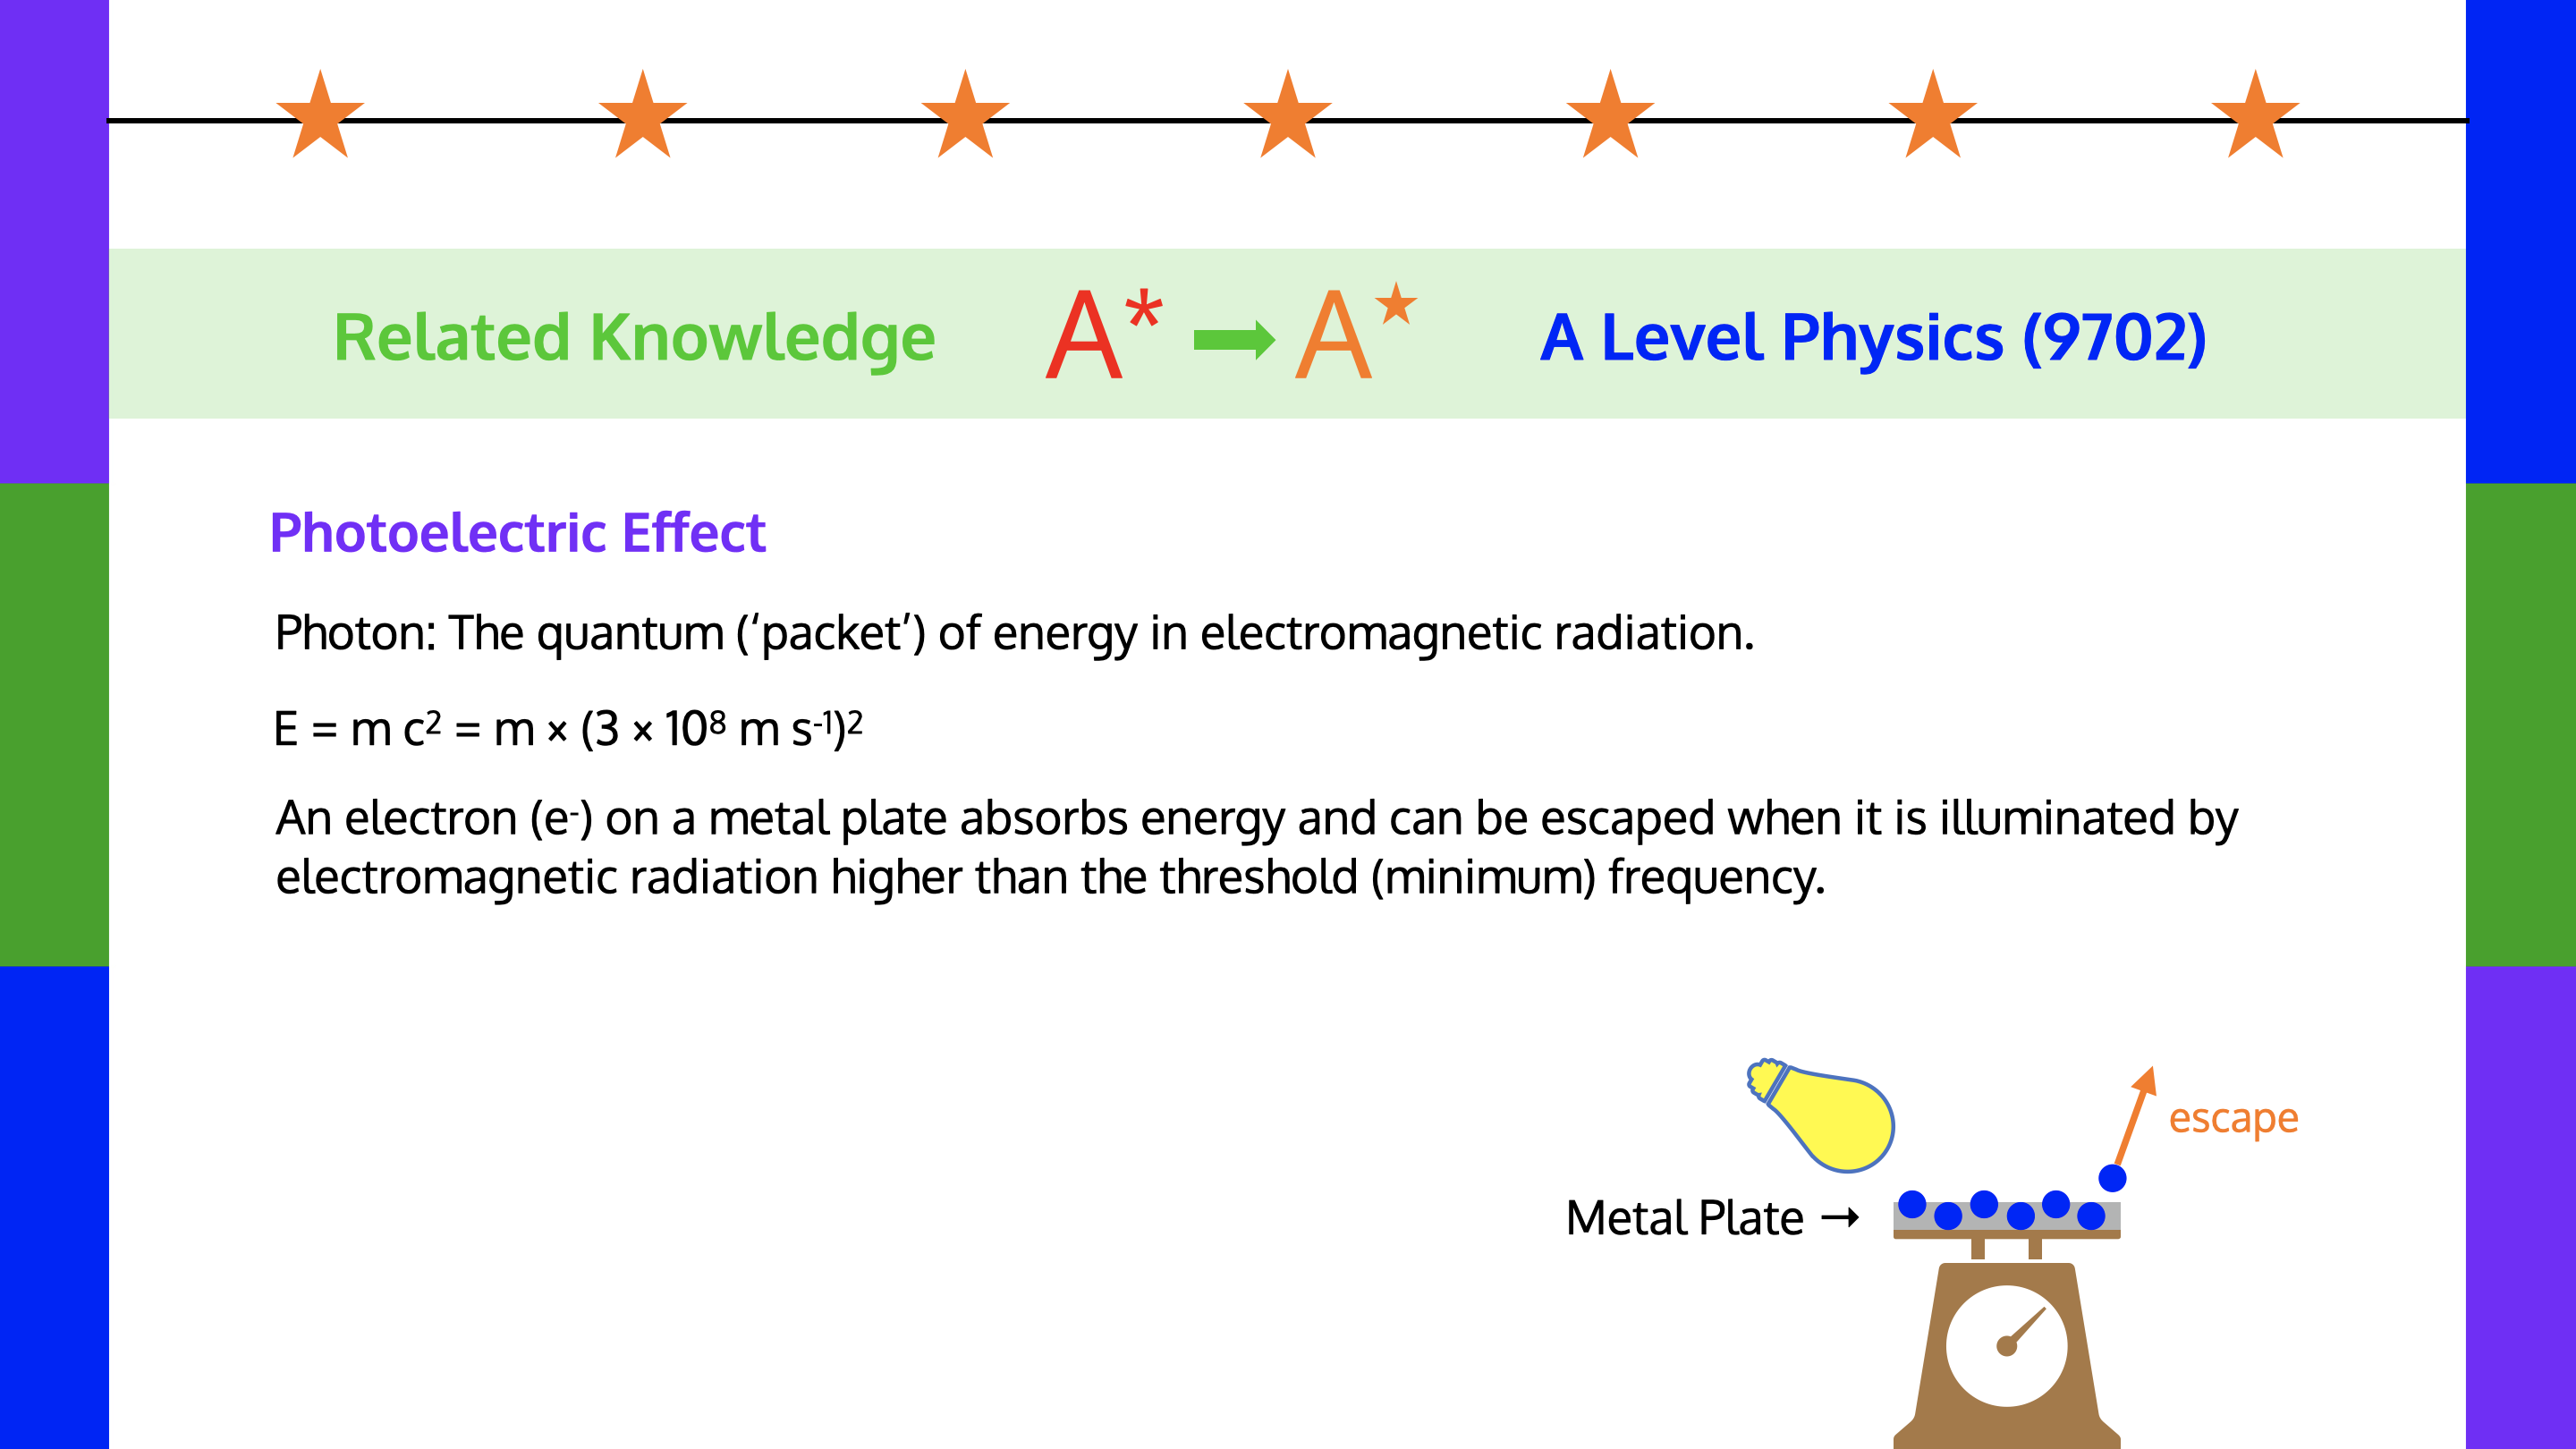 Physics (9702) Knowledge: Photoelectric Effect